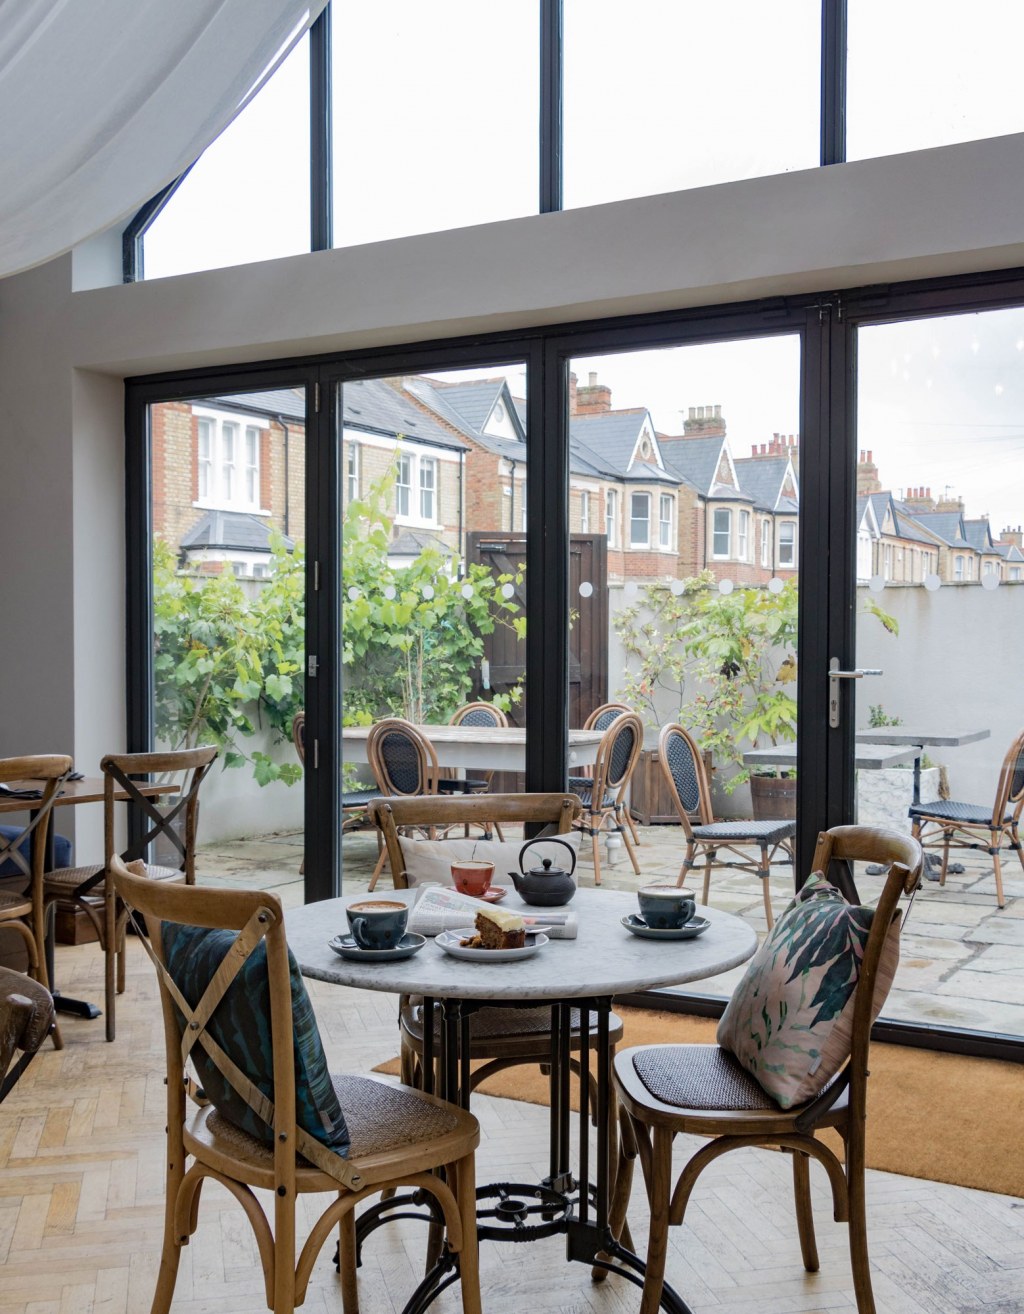 ThirtyEight, Summertown Oxford / Central dining room with large windows looking out onto the private courtyard